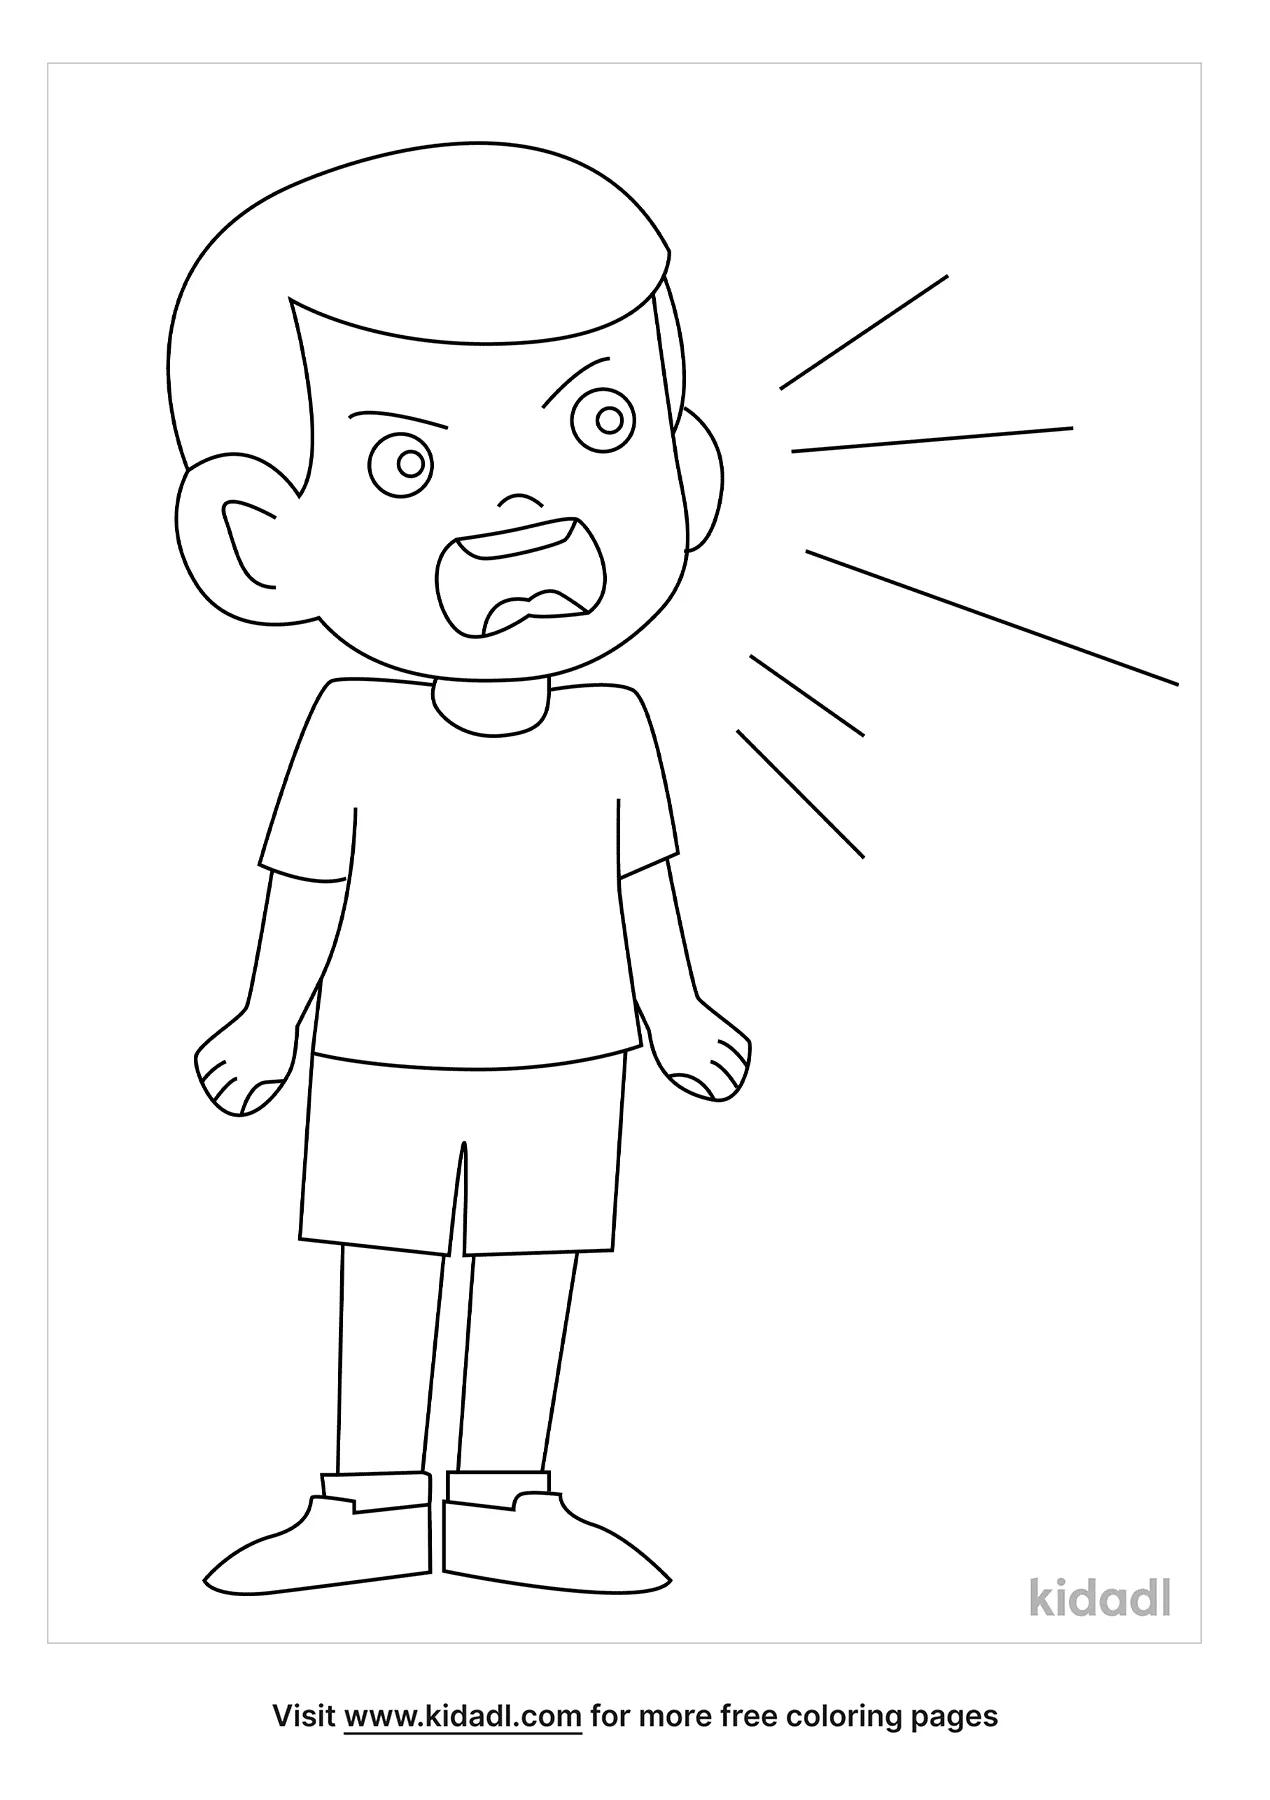 Yelling Children Coloring Page